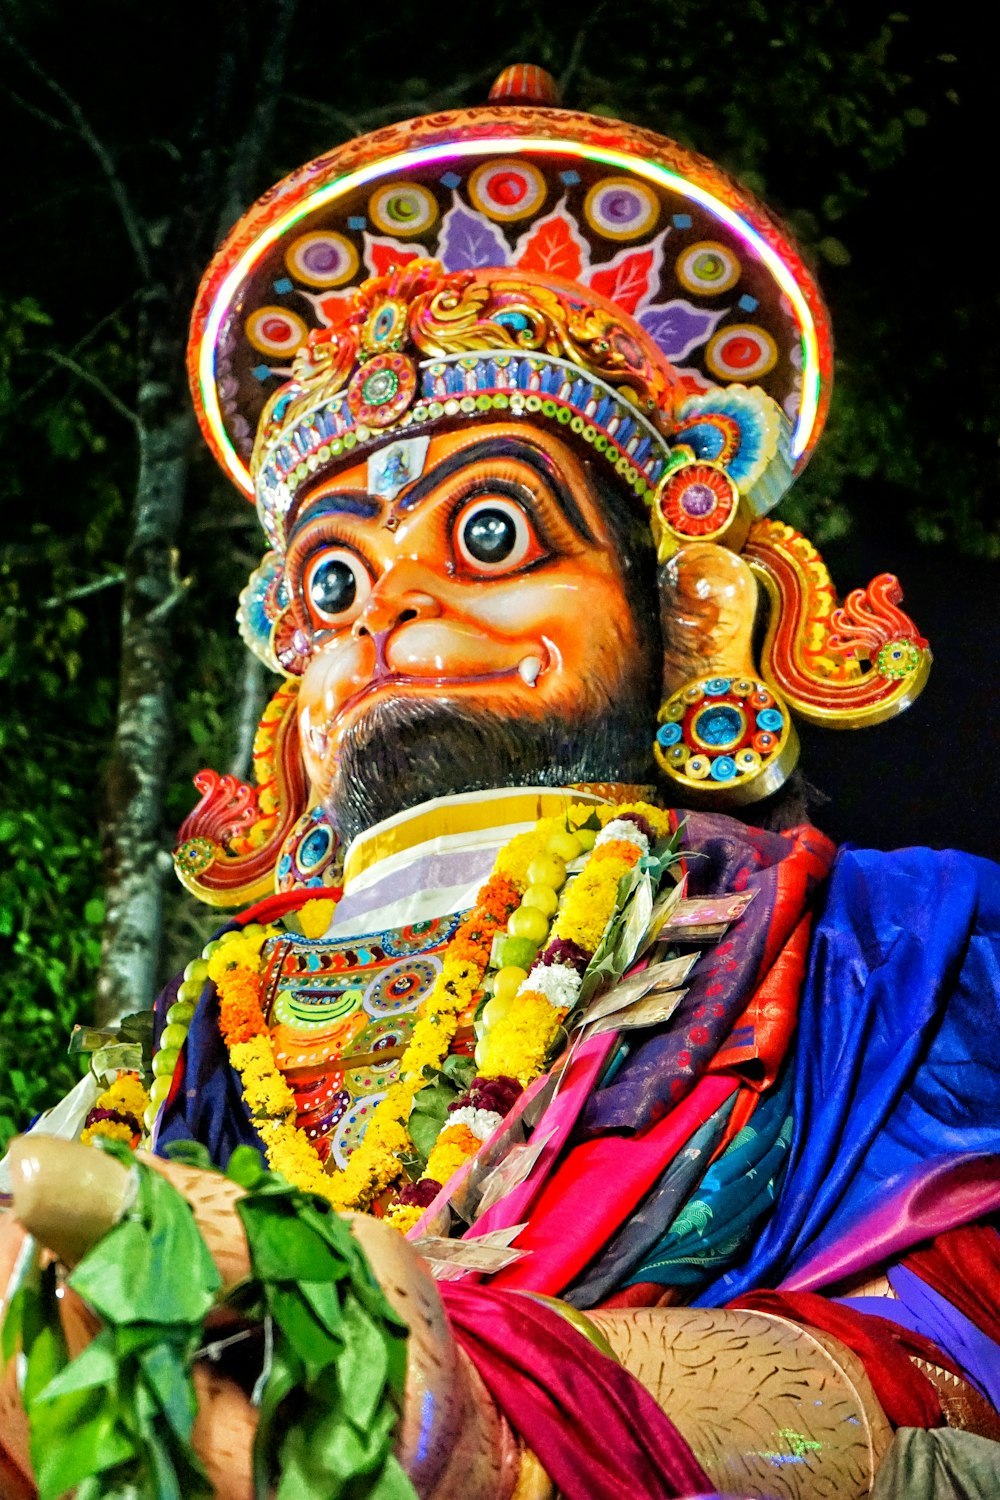 a statue of a man with a beard wearing a colorful headdress